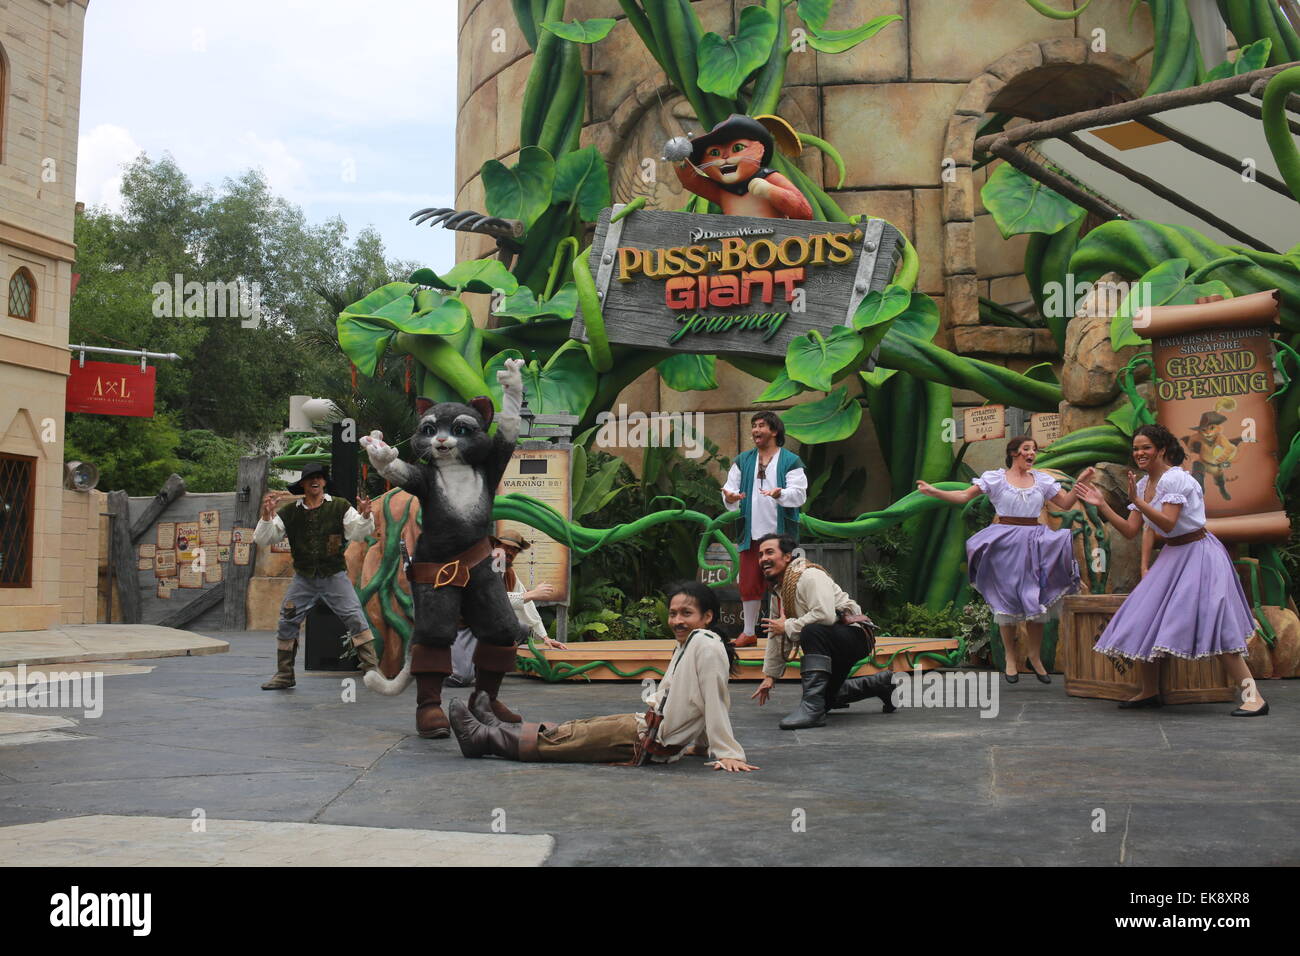 (150408) -- SINGAPORE, April 8, 2015 (Xinhua) -- Actors perform in front of the entrance of 'Puss In Boots' Giant Journey' roller coaster at Universal Studios Singapore in Singapore, on April 8, 2015. 'Puss In Boots' Giant Journey', a suspended roller coaster program, was launched on Wednesday at Universal Studios Singapore. 'Puss In Boots', who originally appeared in the 'Shrek' franchise, rose to stand-alone fame in October 2011 with his first hit movie. The launch of the themed suspended roller coaster highlights the theme park's fifth anniversary celebrations. (Xinhua/Bao Xuelin) Stock Photo